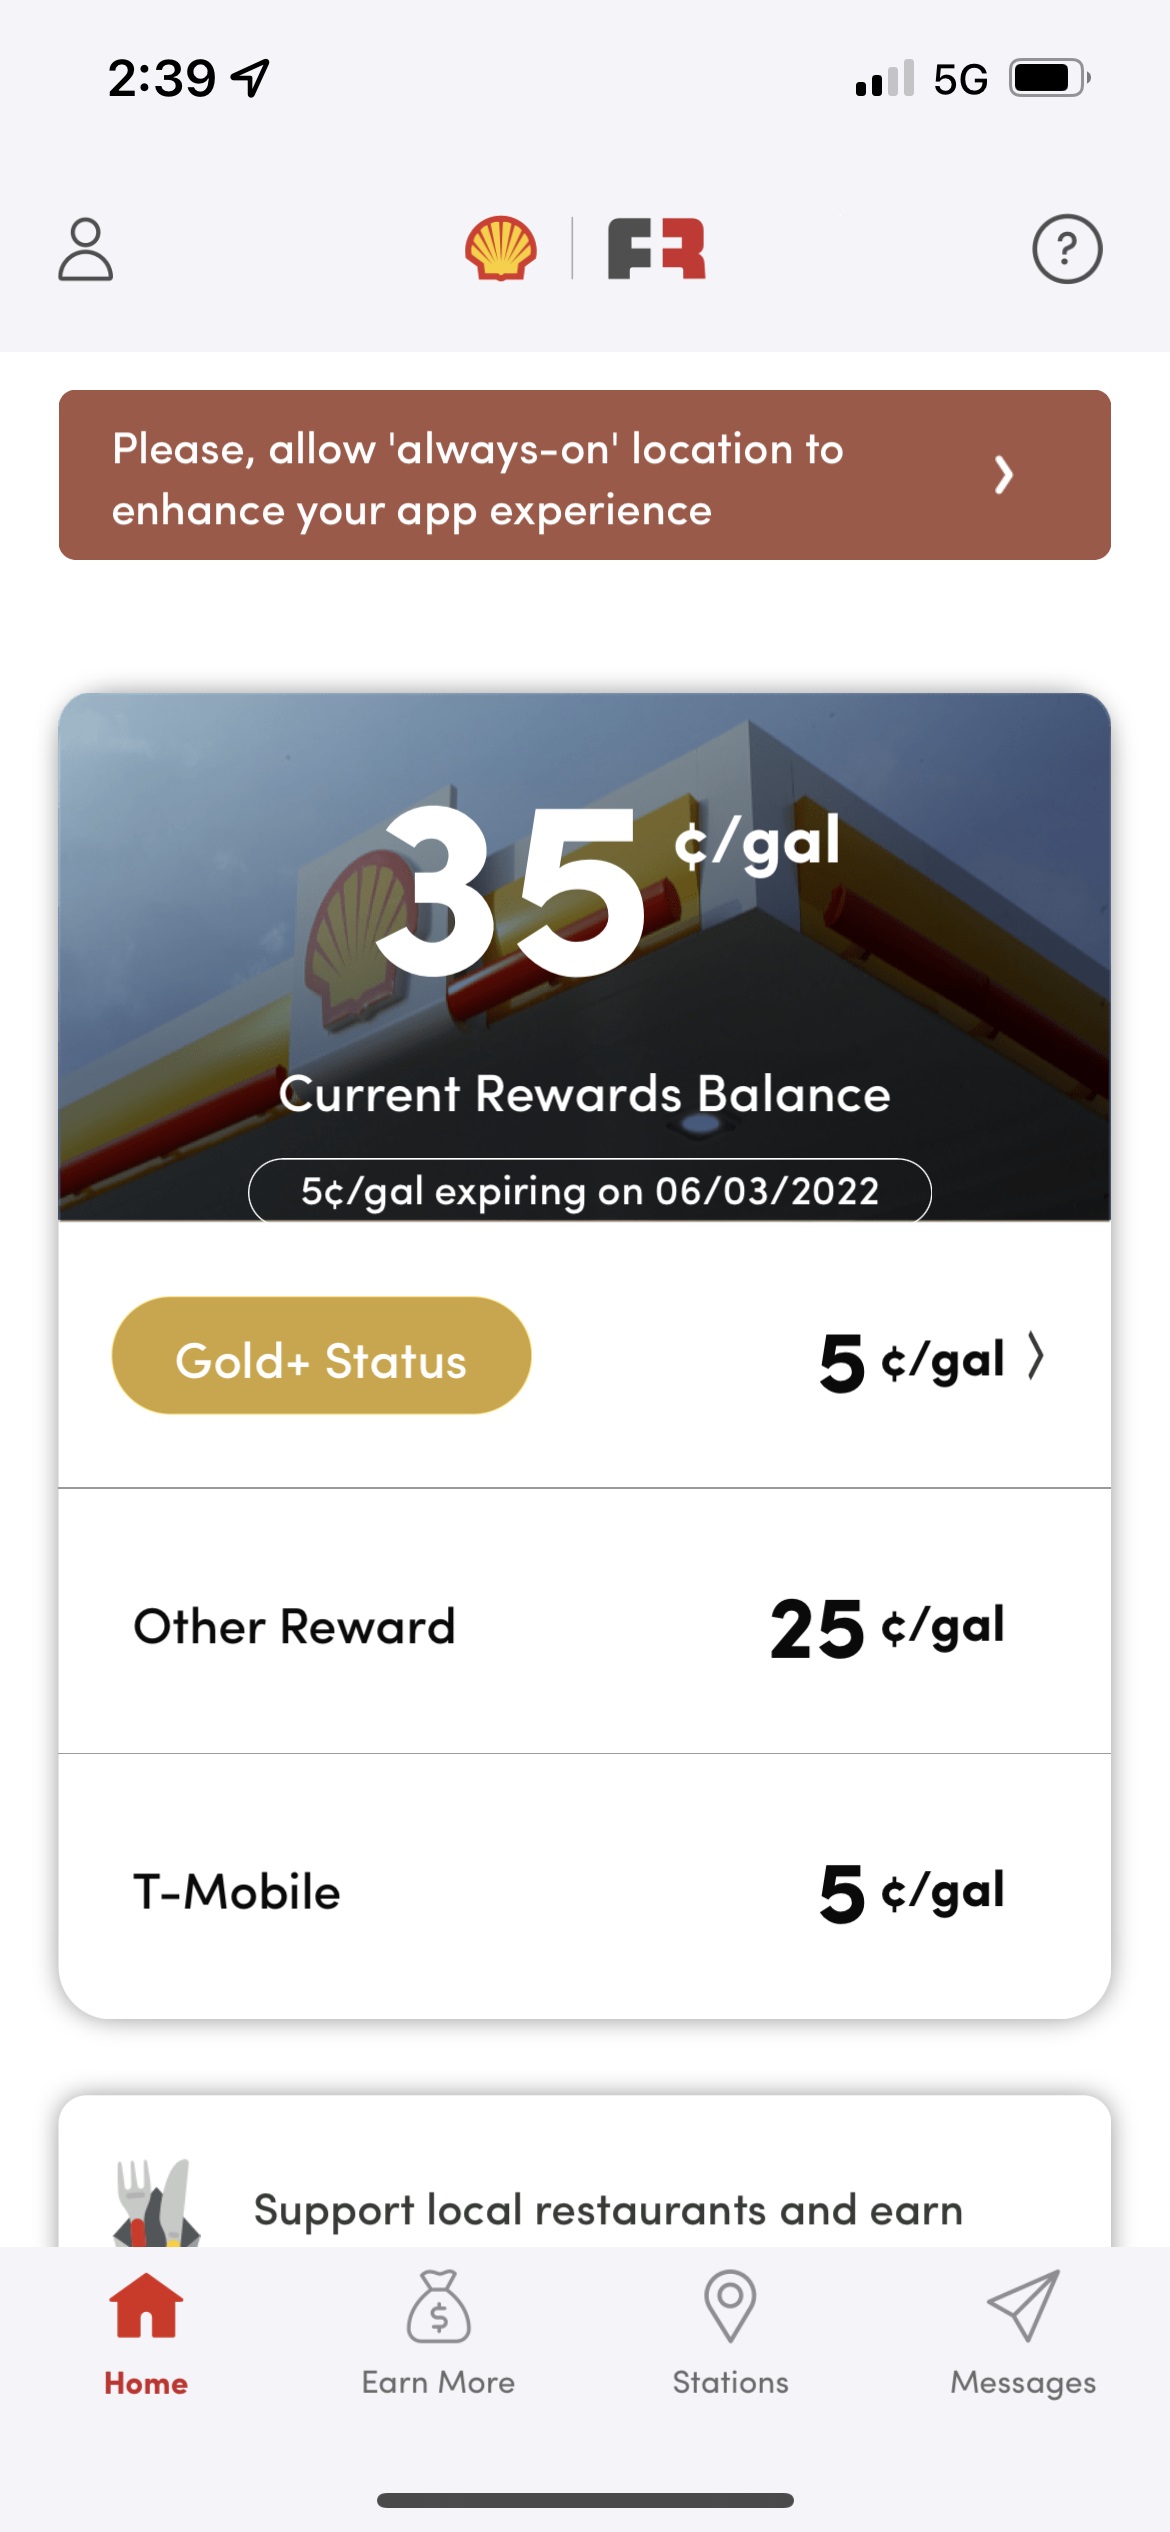 received 25 cents discount per gal on shell fuel reward account every time I use shell app